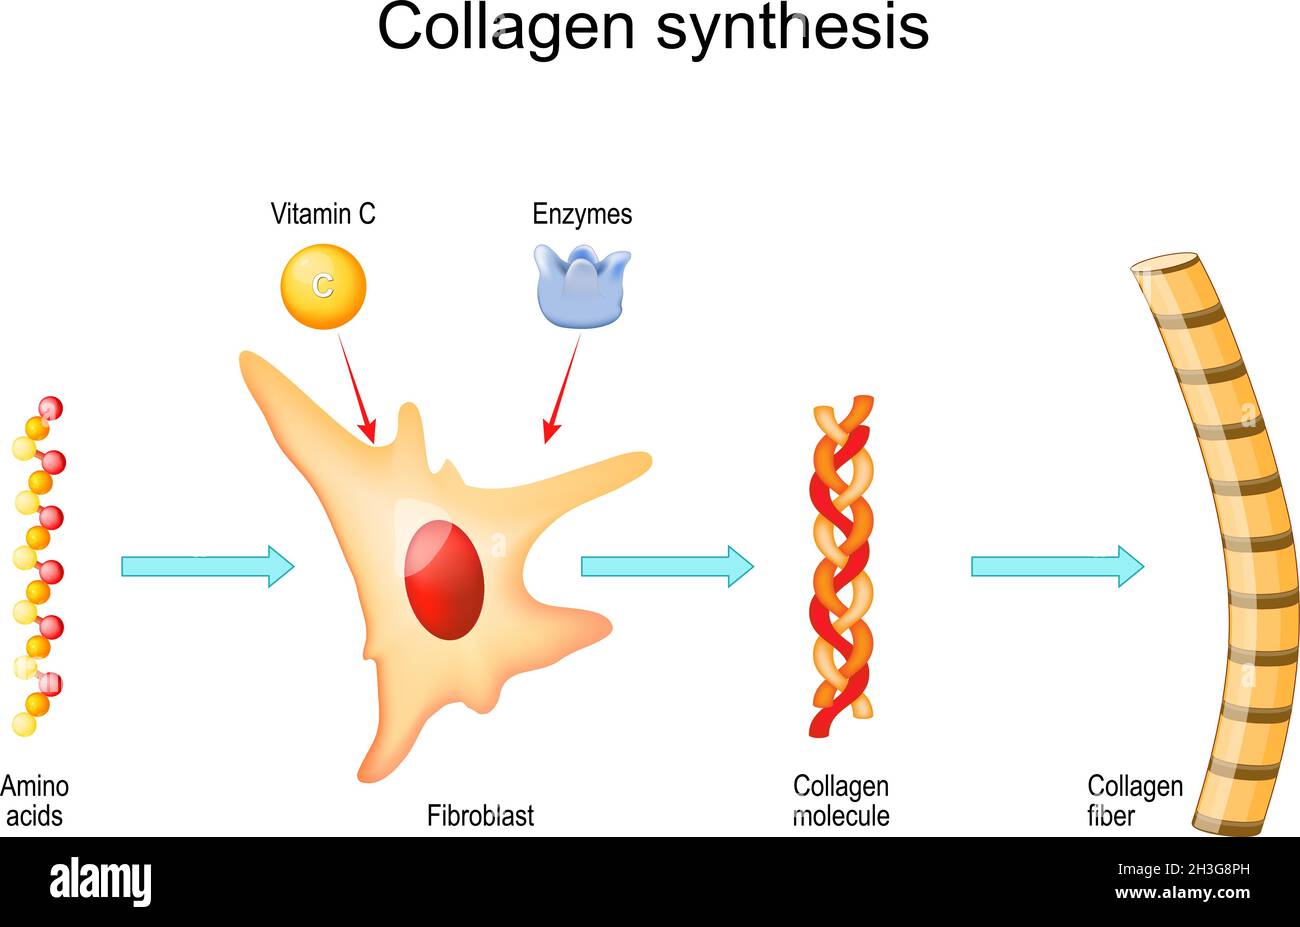 Collagen synthesis with Vitamin C and Enzymes. From Fibroblast and Amino acids to Collagen fiber that comprises molecules of protein. Vector Stock Vector